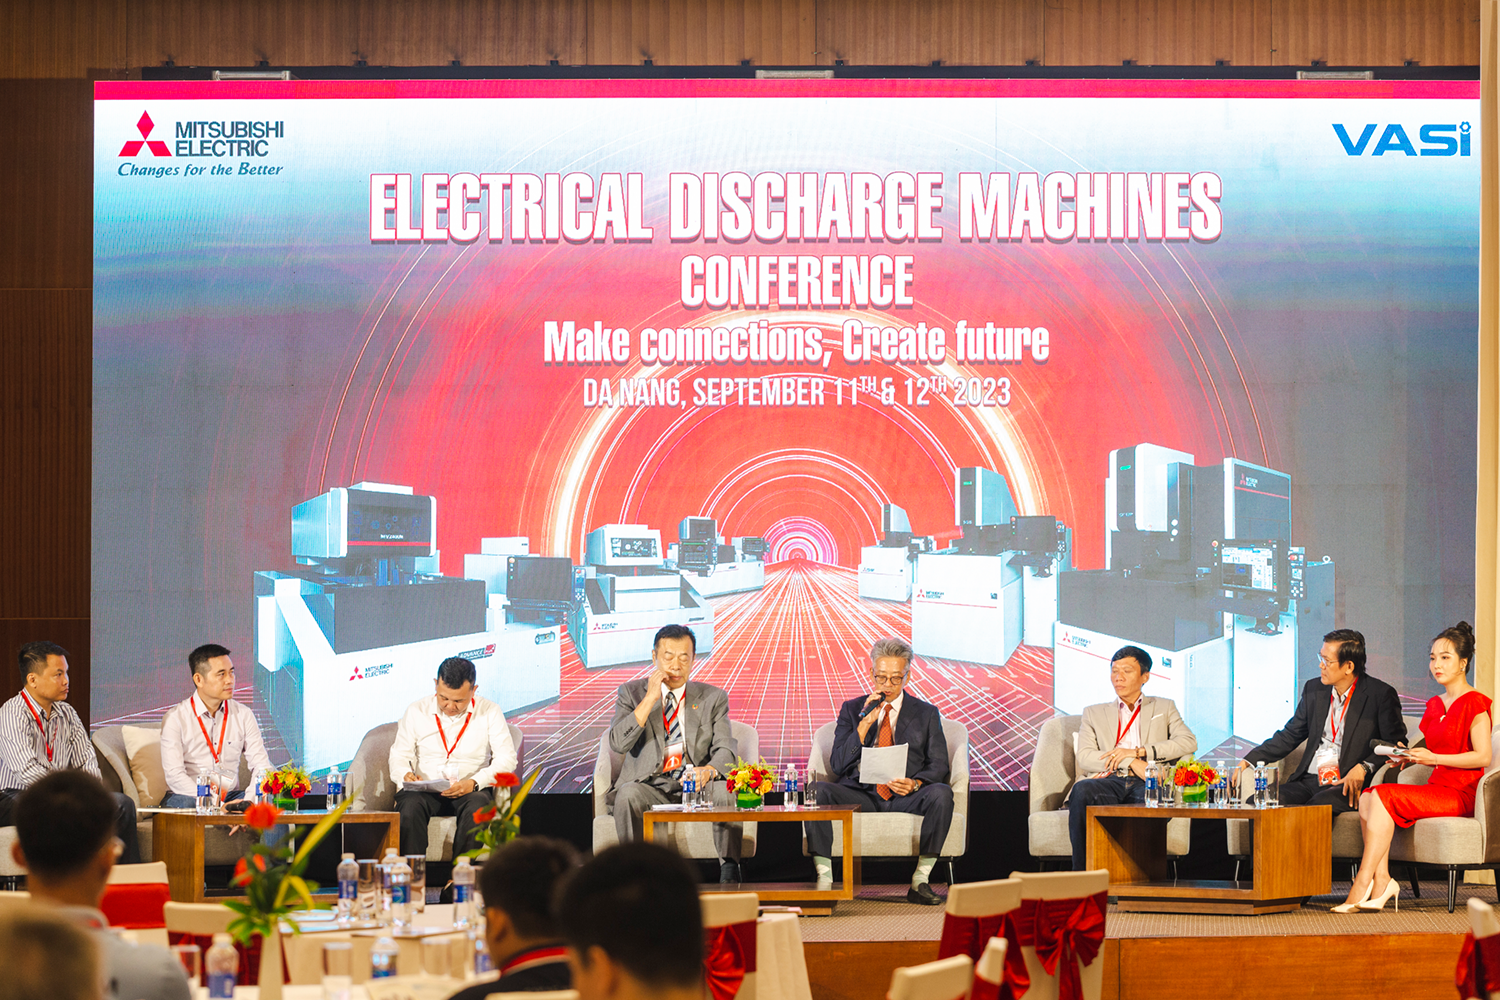 Mitsubishi Electric Vietnam organized a technology conference on Electrical Discharge Machines in Da Nang